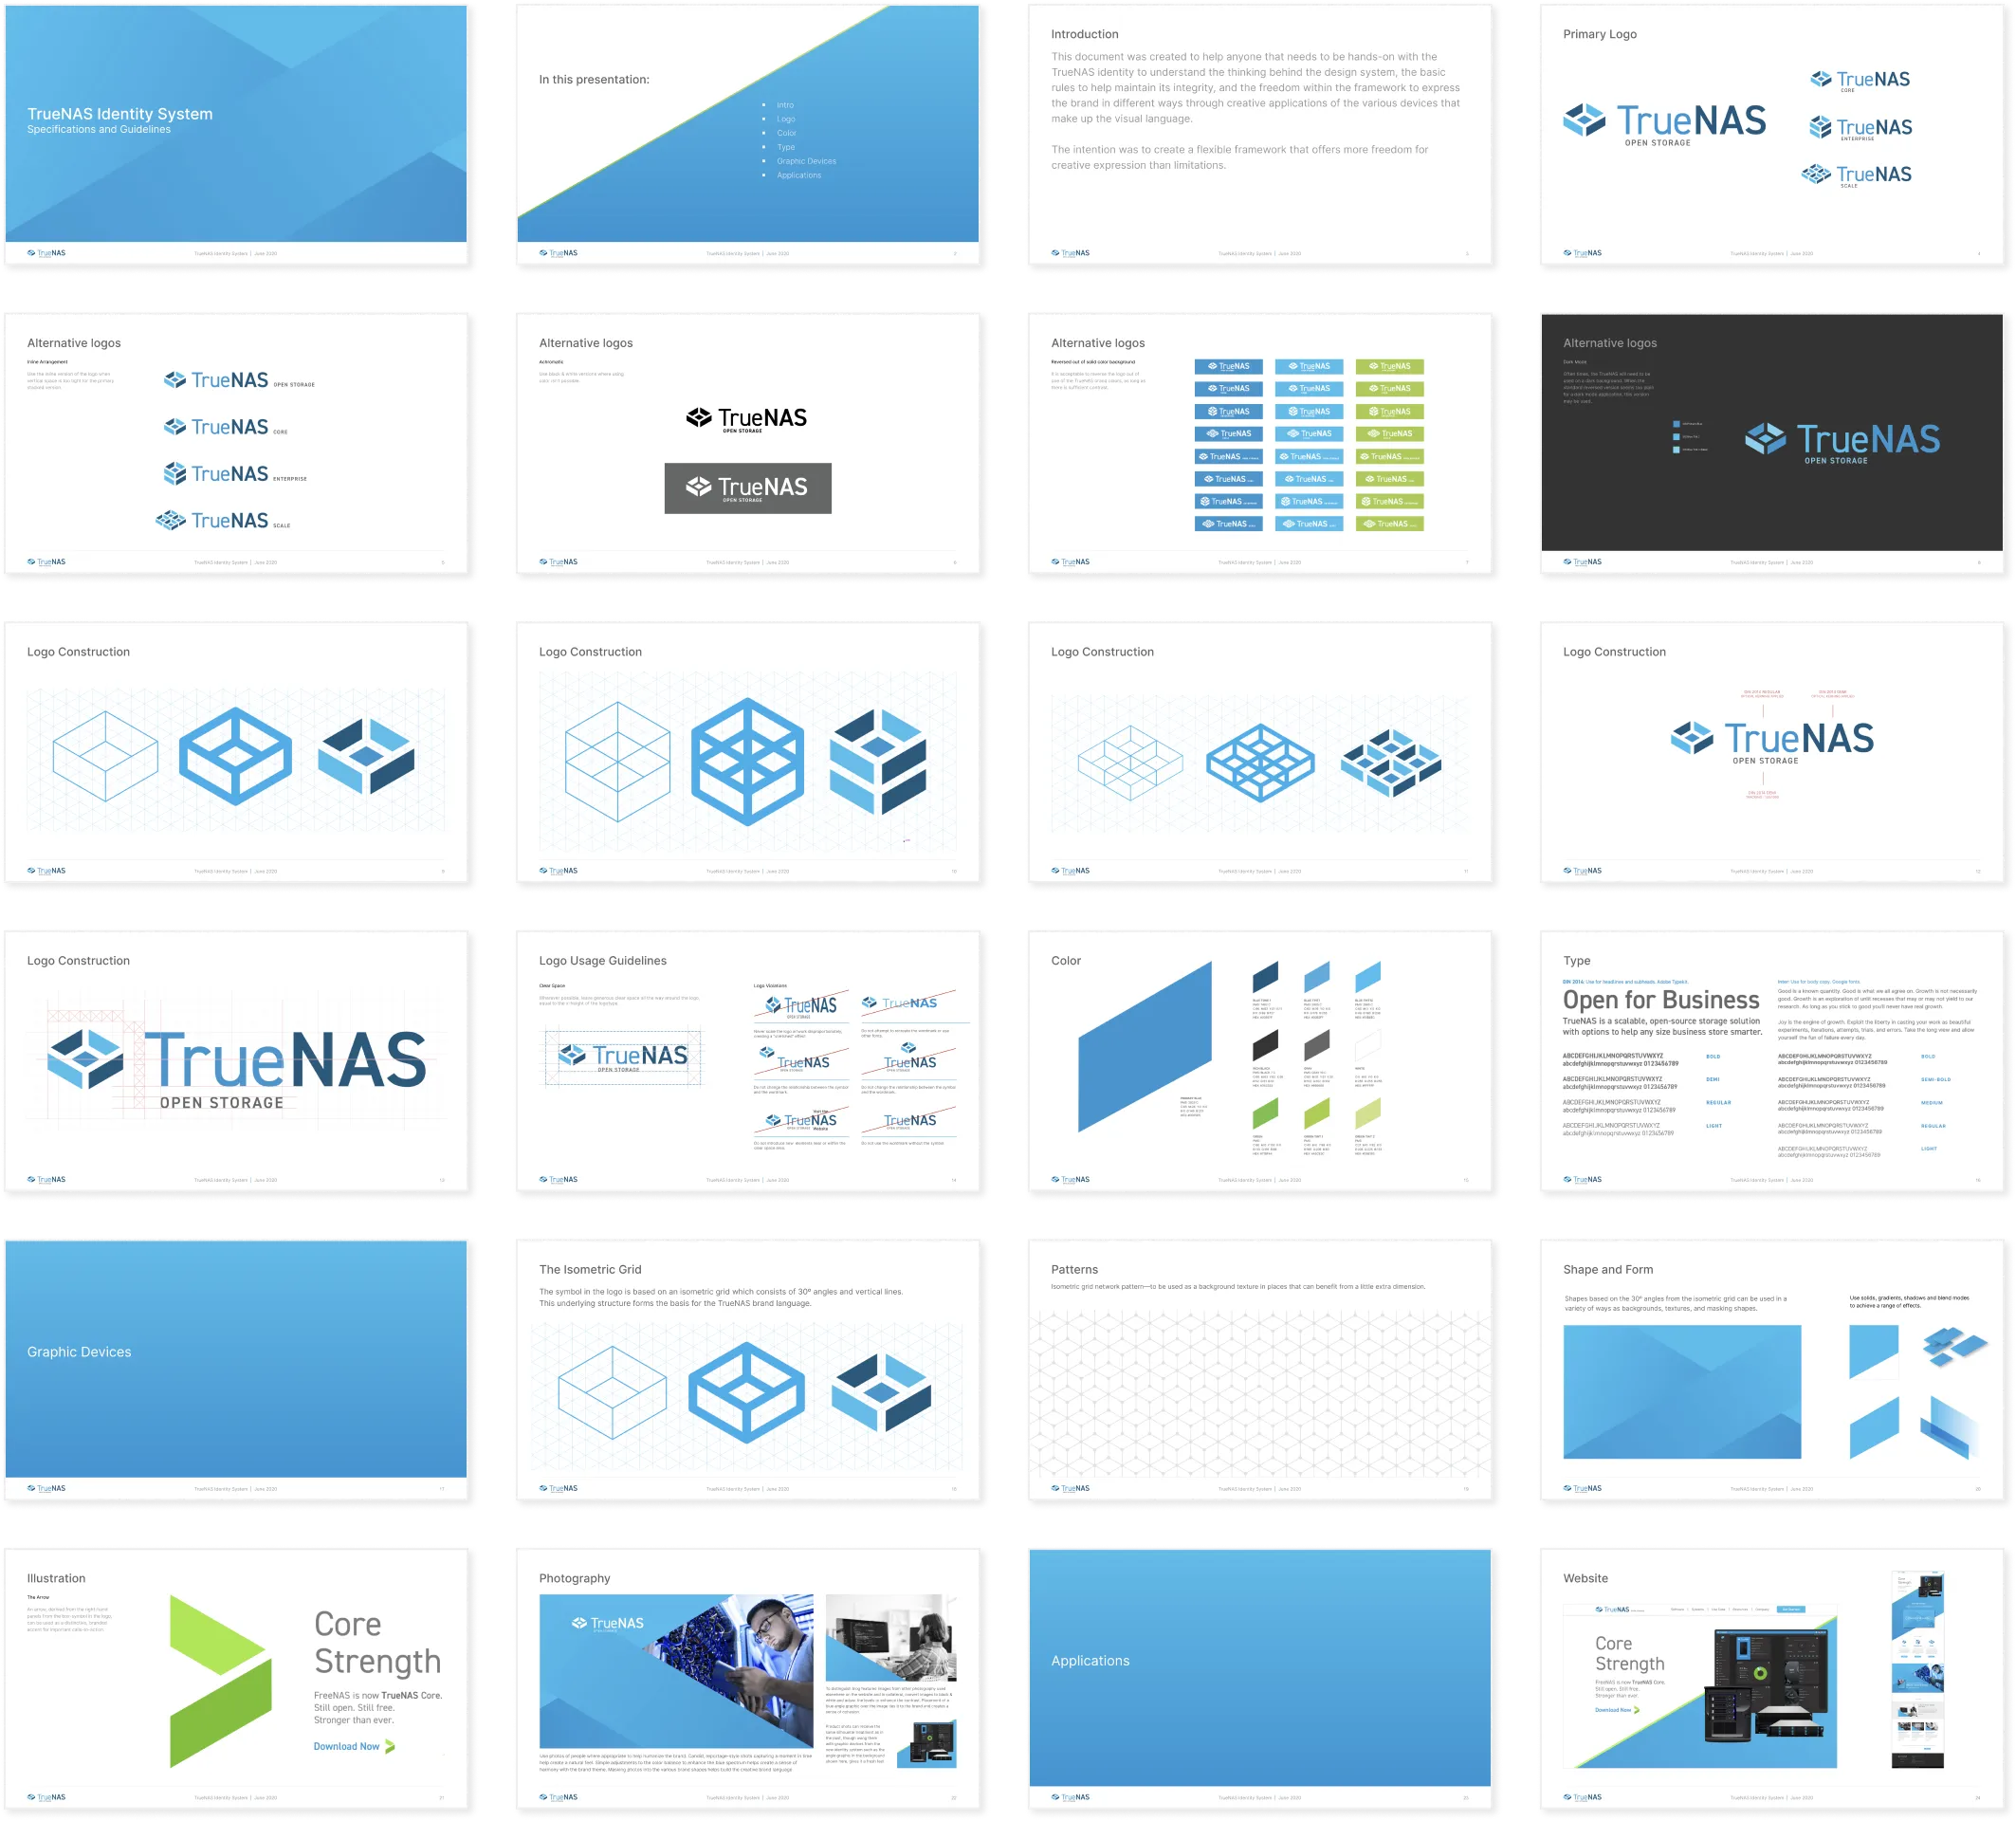 Image showing select slides from TrueNAS planning doc